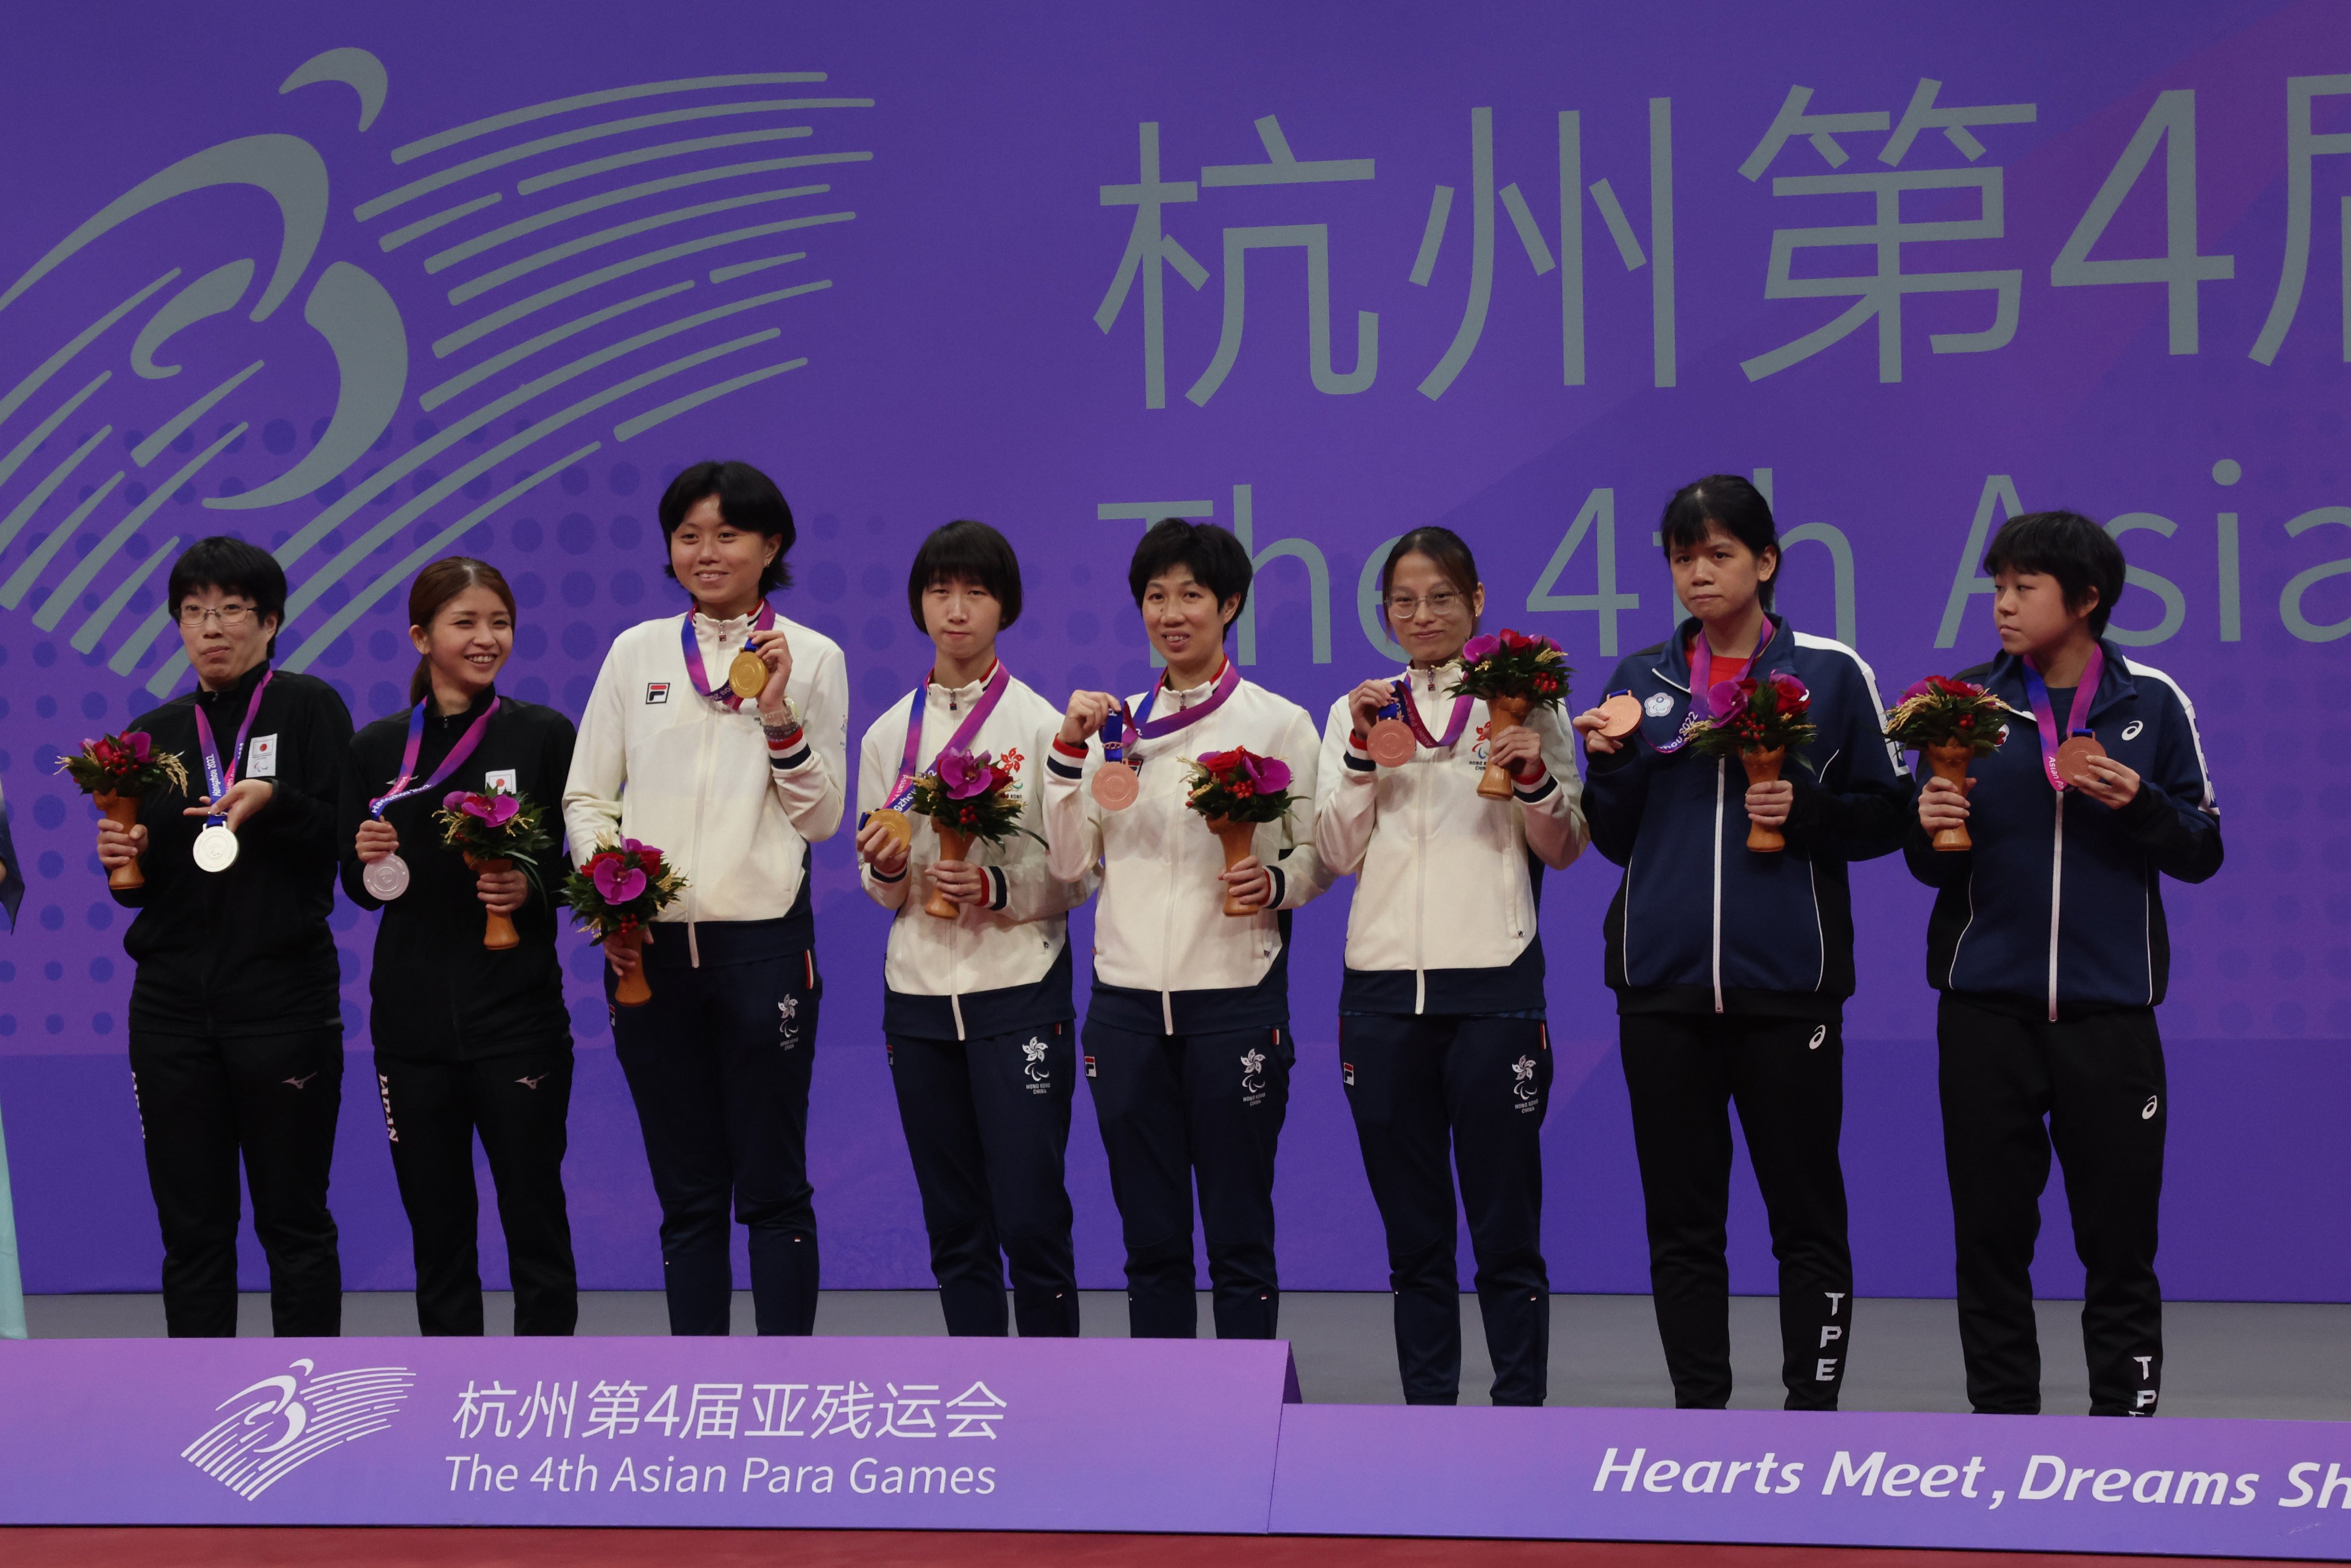 Hong Kong’s table tennis players added further medals to the city’s tally. Photo: China Hong Kong Paralympic Committee